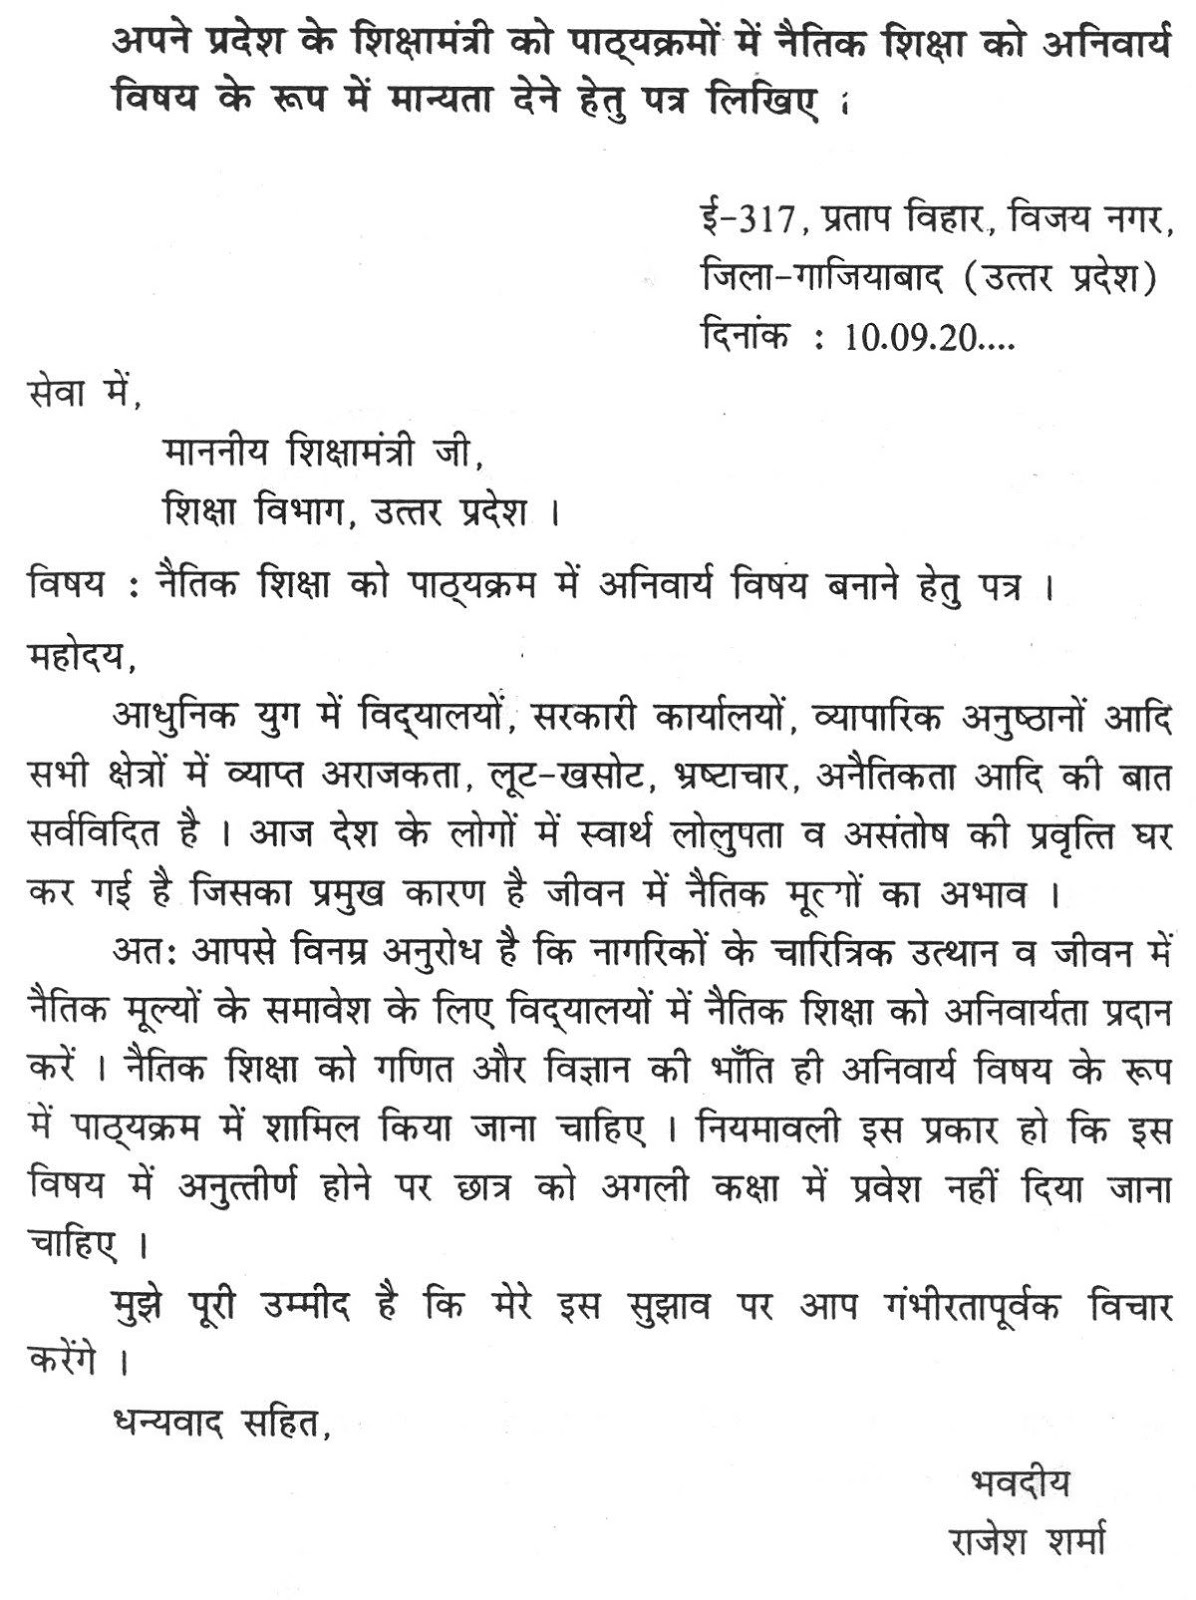 application letter in marathi meaning